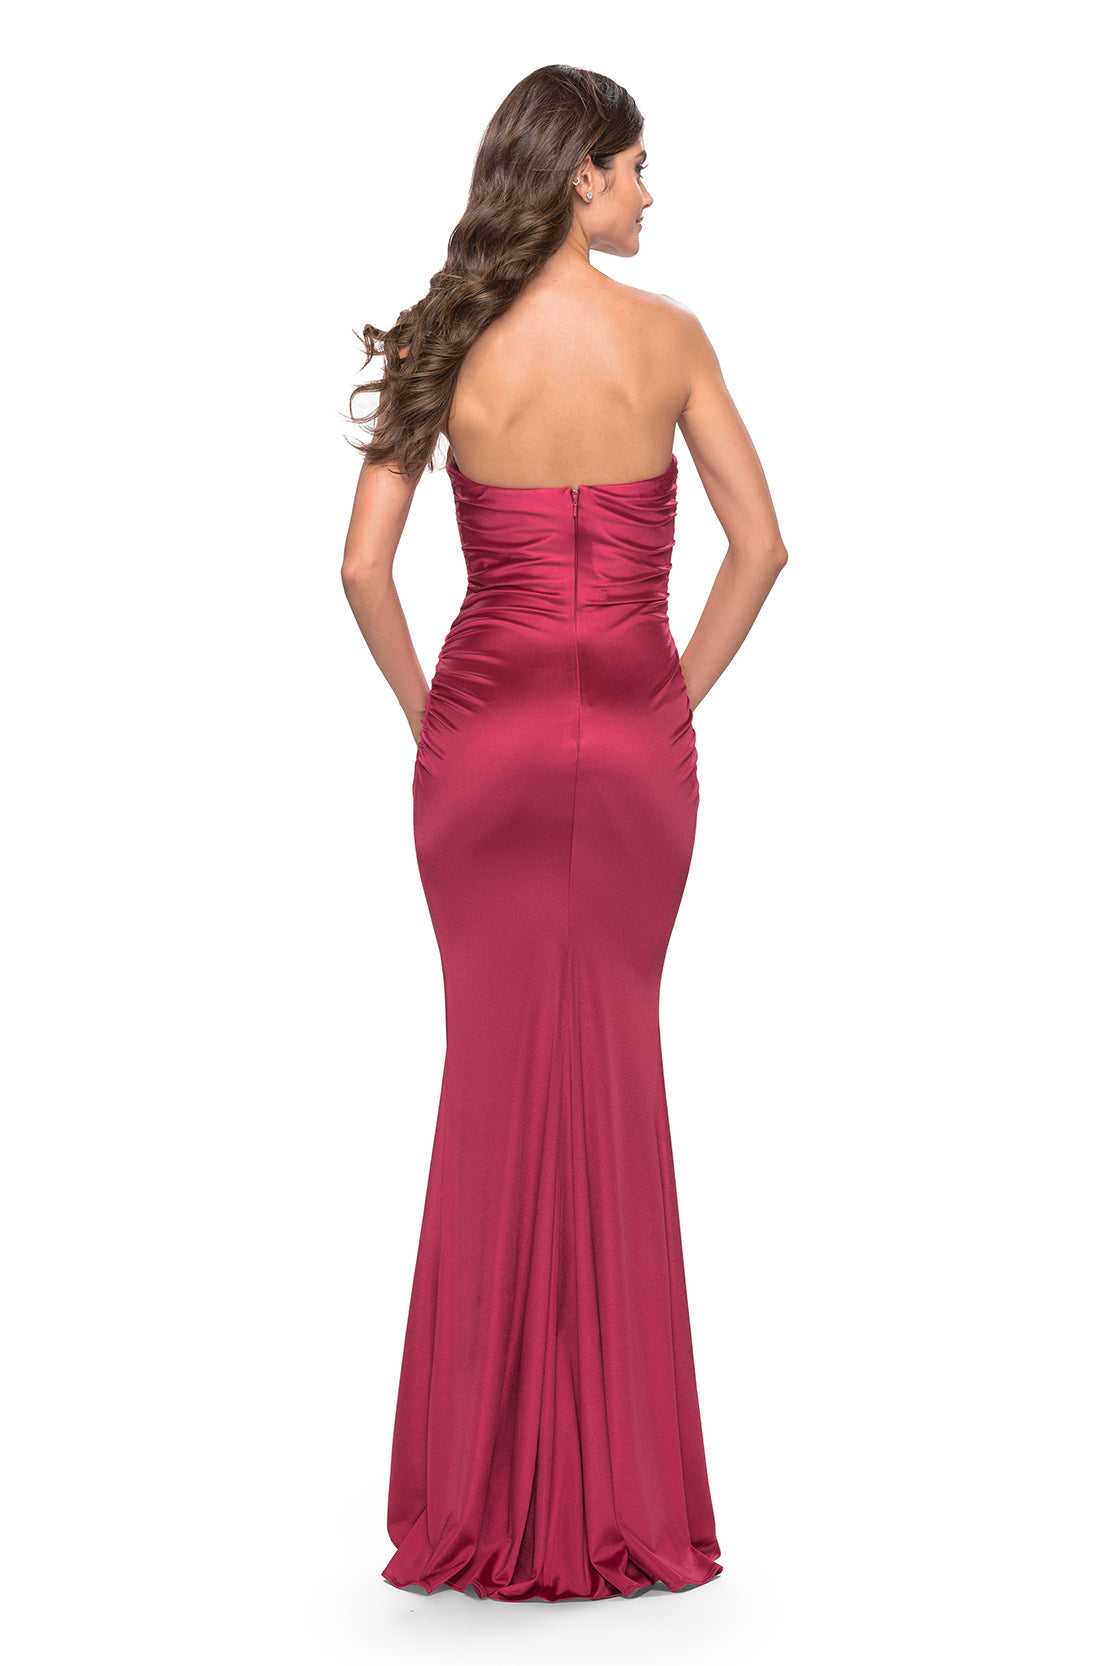 Make a statement at your prom with this stunning champagne stretch satin prom dress by La Femme, available at Madeline's Boutique in Toronto, Canada and Boca Raton, Florida. This elegant and glamorous dress features delicate beading and sequins on the bodice, thin shoulder straps, and a low V-cut back for a modern and sexy touch. Perfect for any prom-goer, this dress is sure to make you feel confident and beautiful all night long.